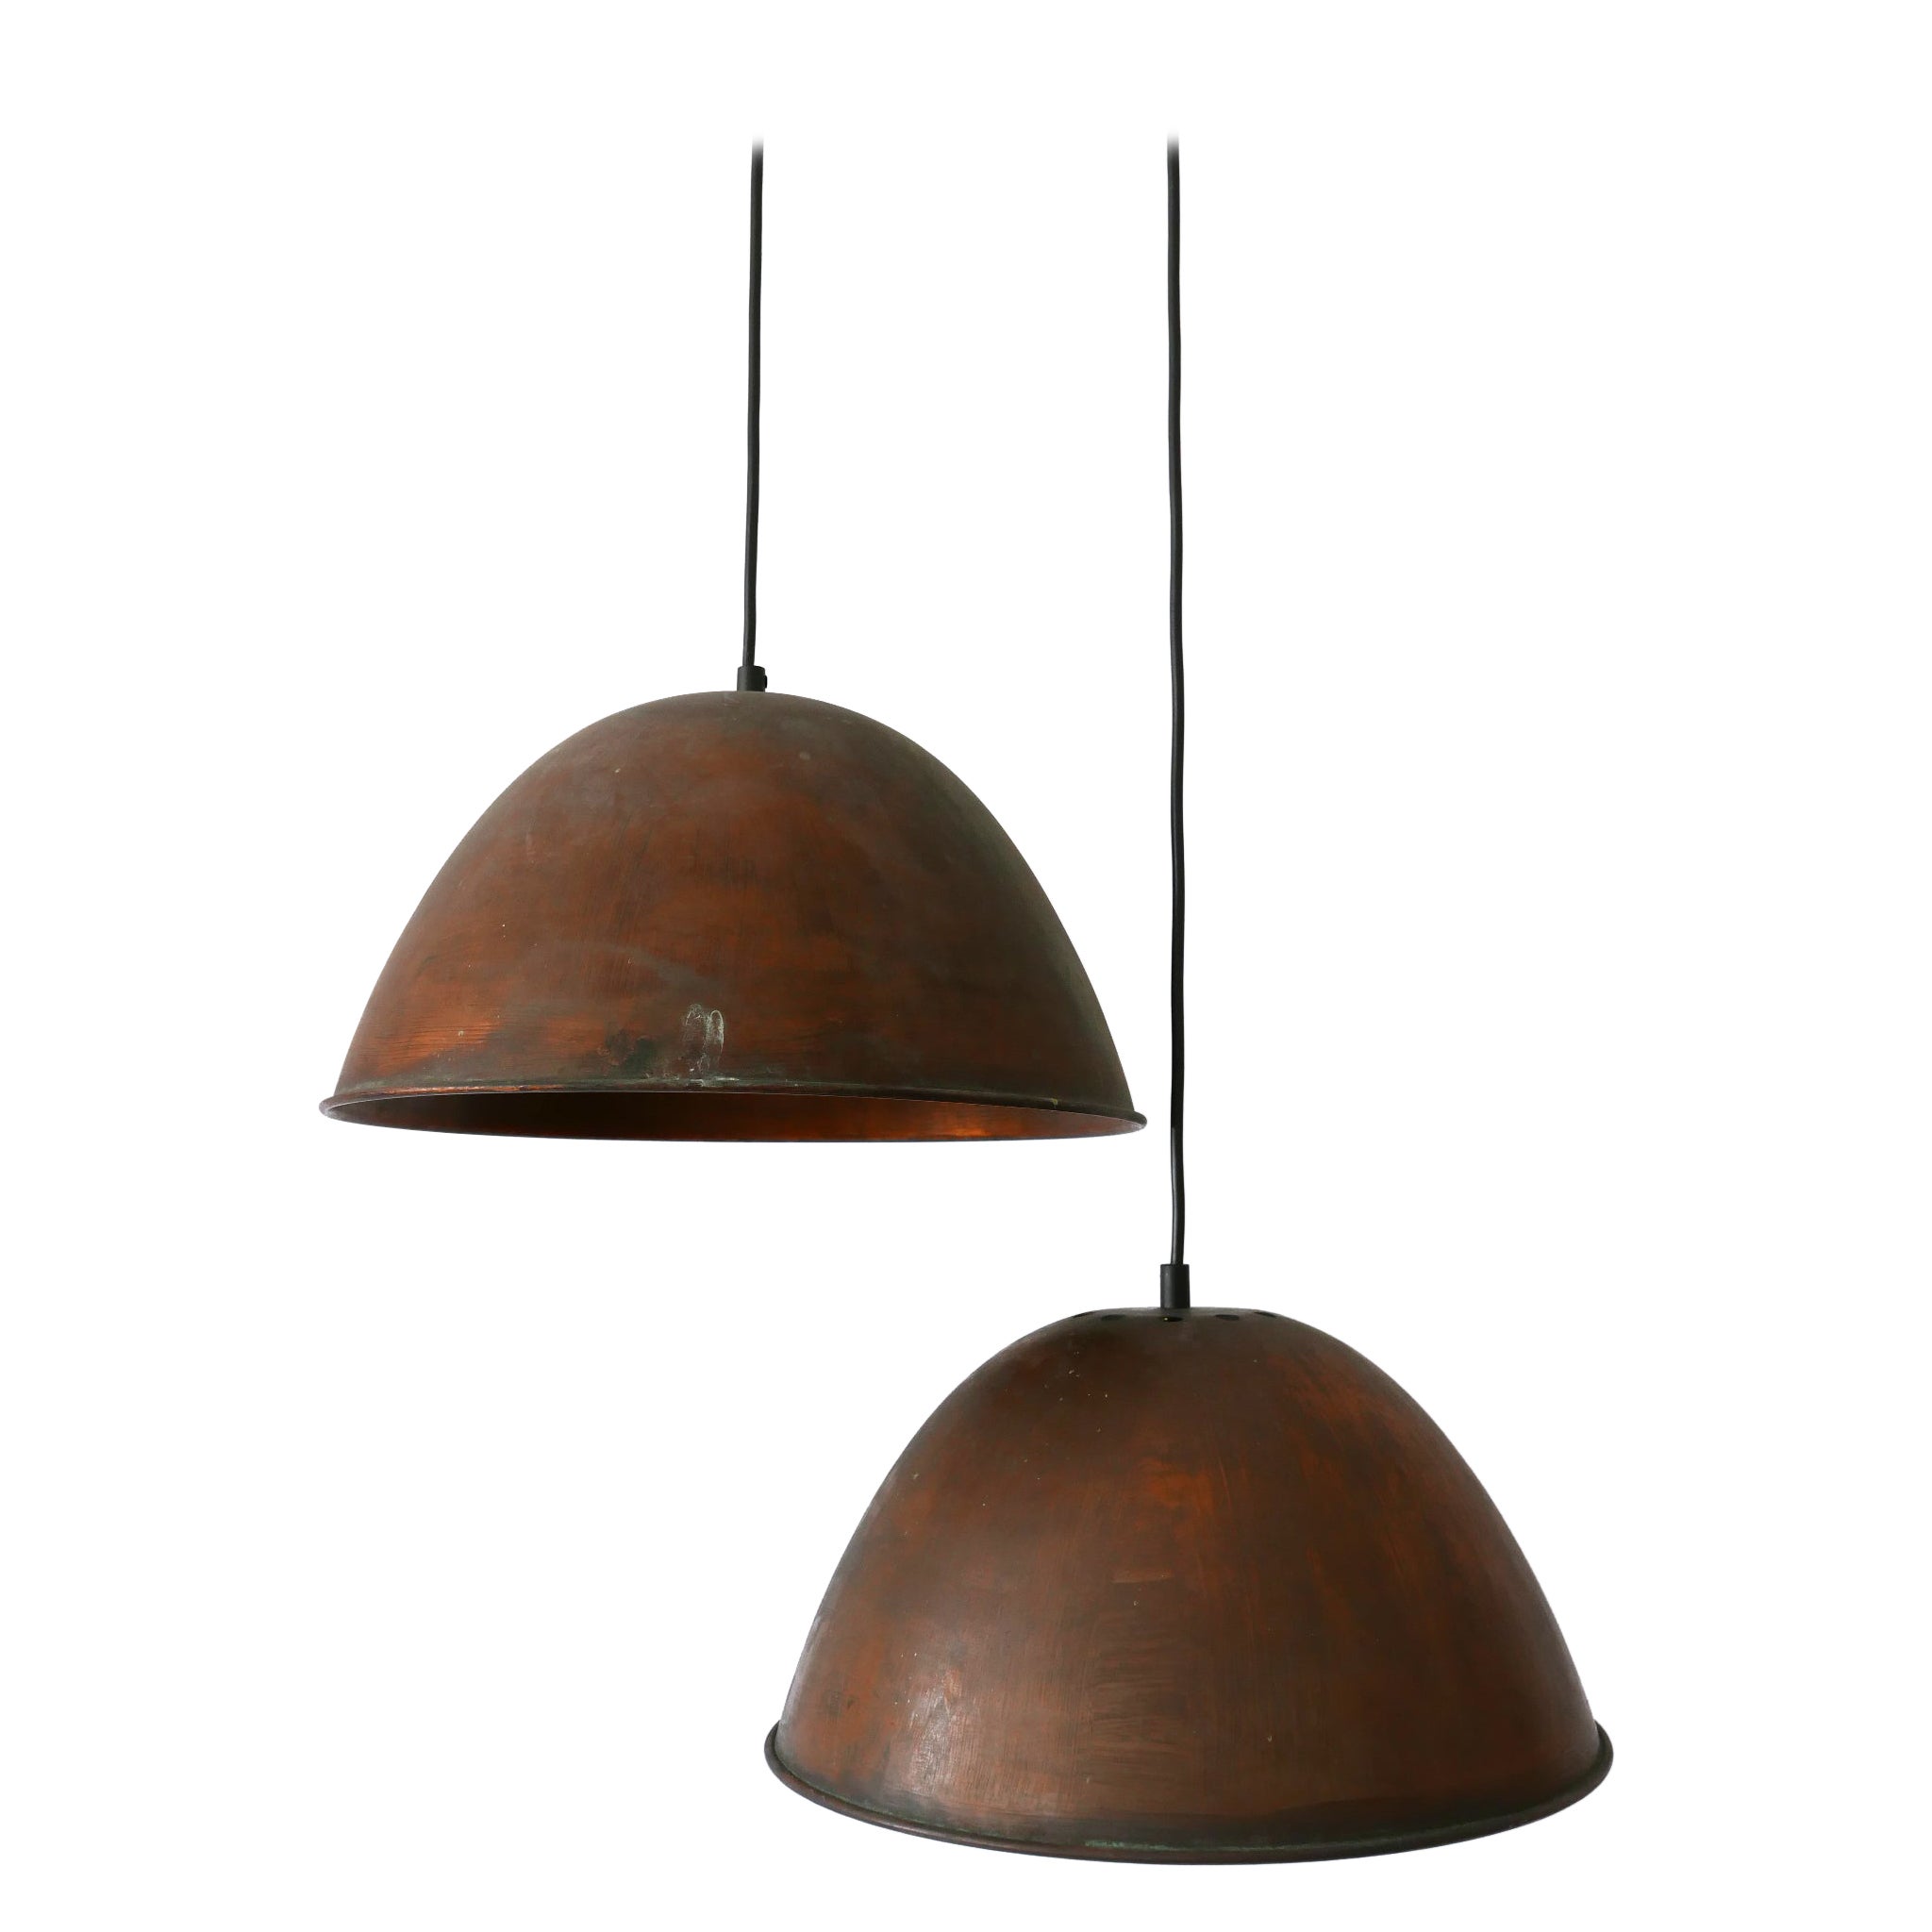 Set of Two Mid-Century Modern Copper Pendant Lamps or Hanging Lights 1950s For Sale